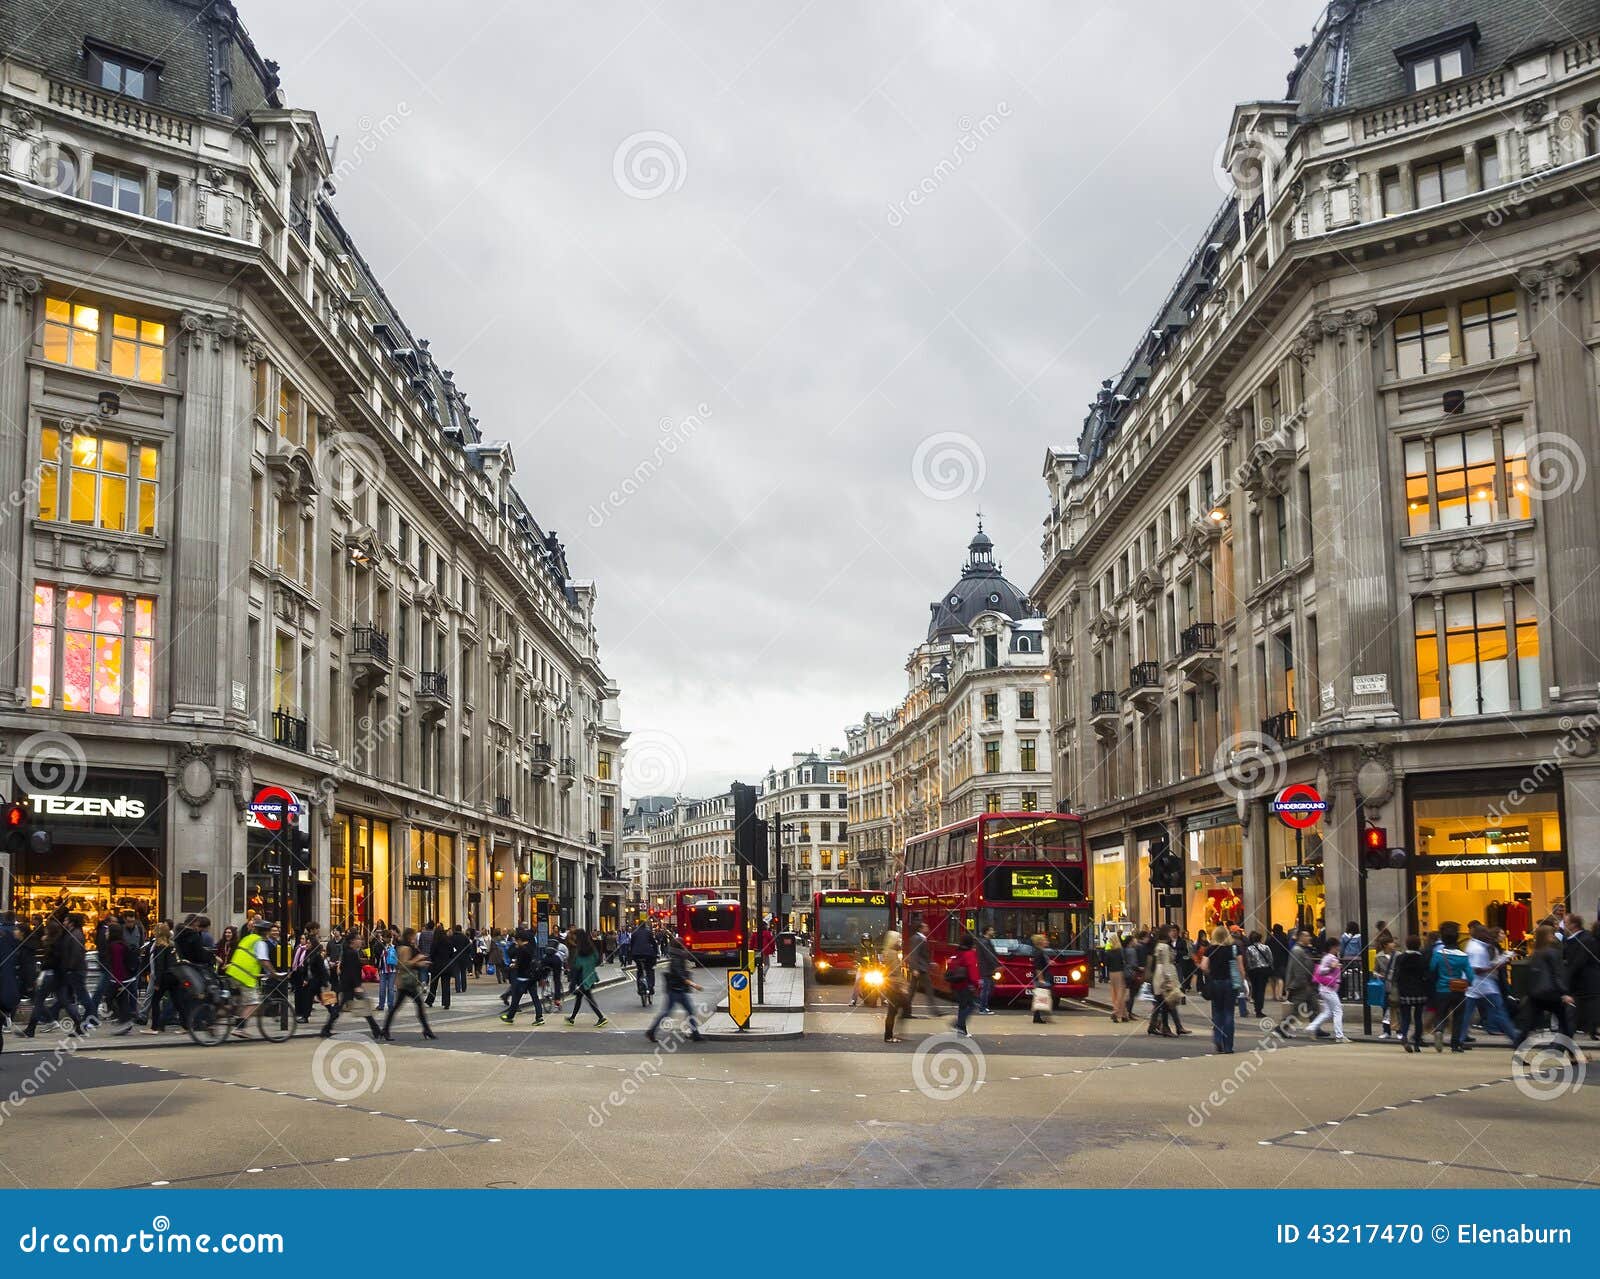 Shopping Time In Oxford Street London Editorial Image Image Of